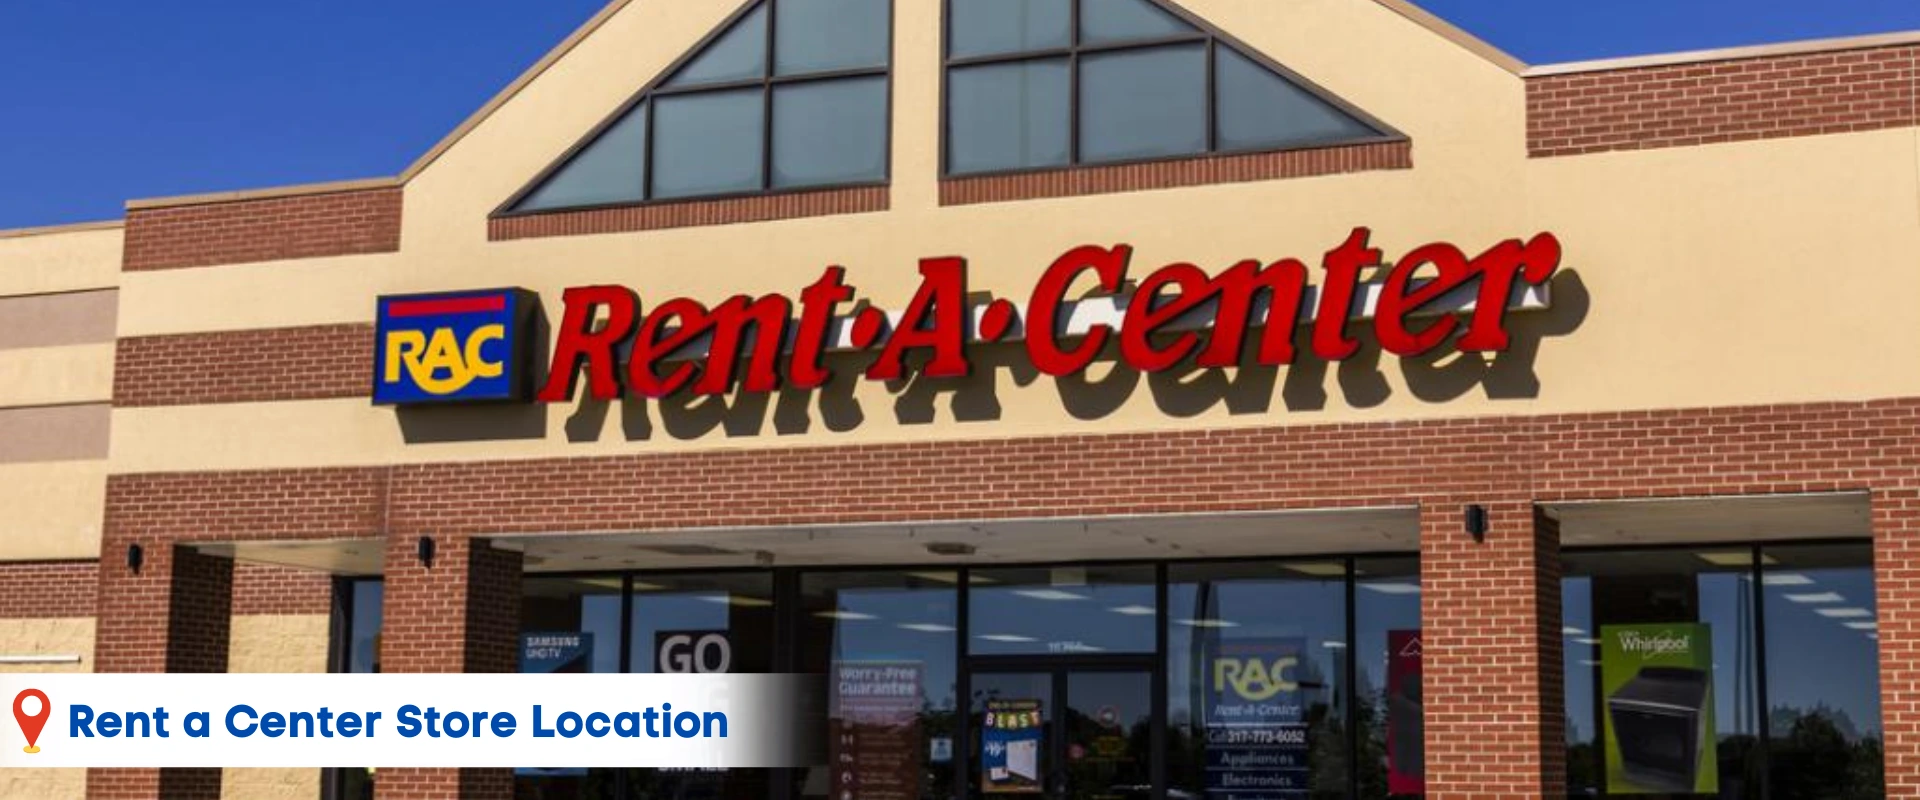 Rent a Center Near Me in Amelia, OH.